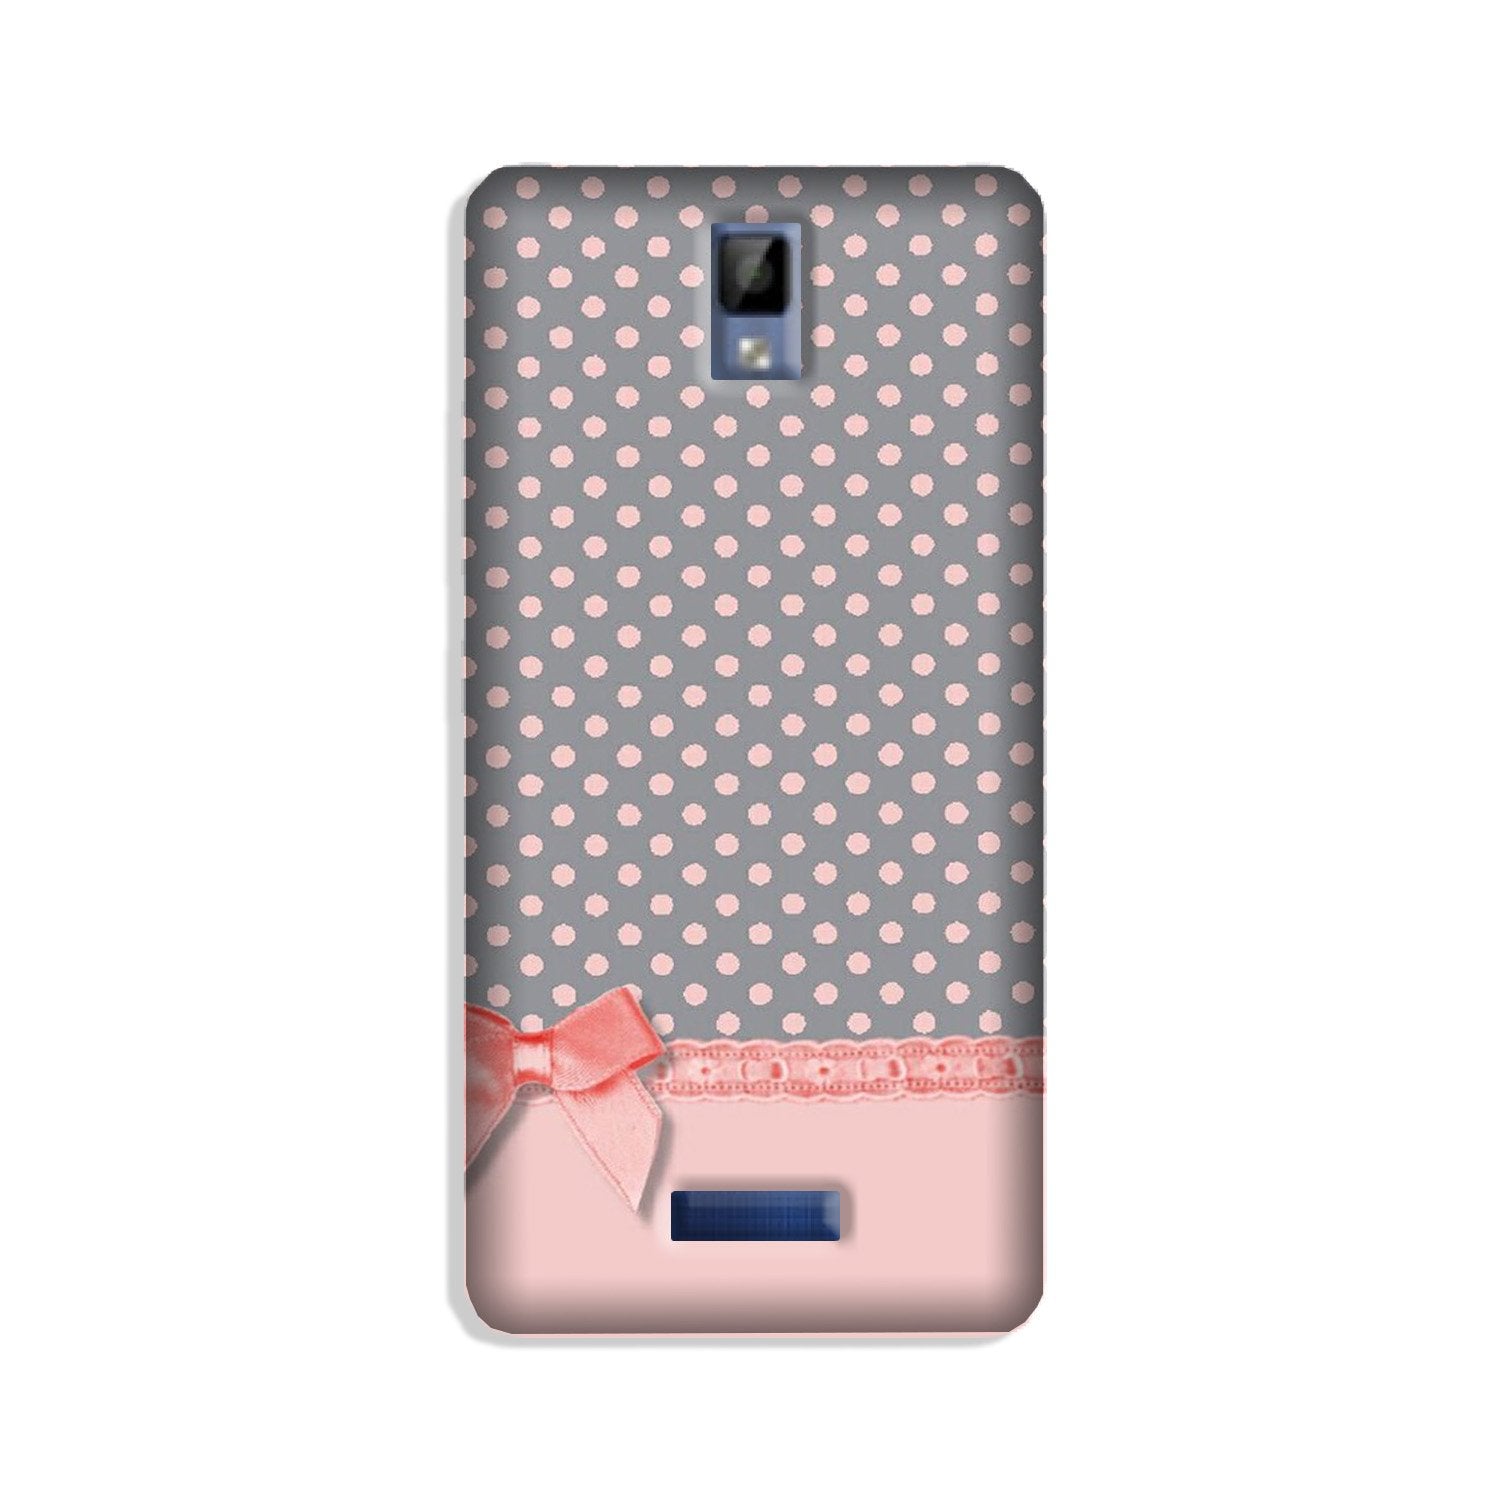 Gift Wrap2 Case for Gionee P7